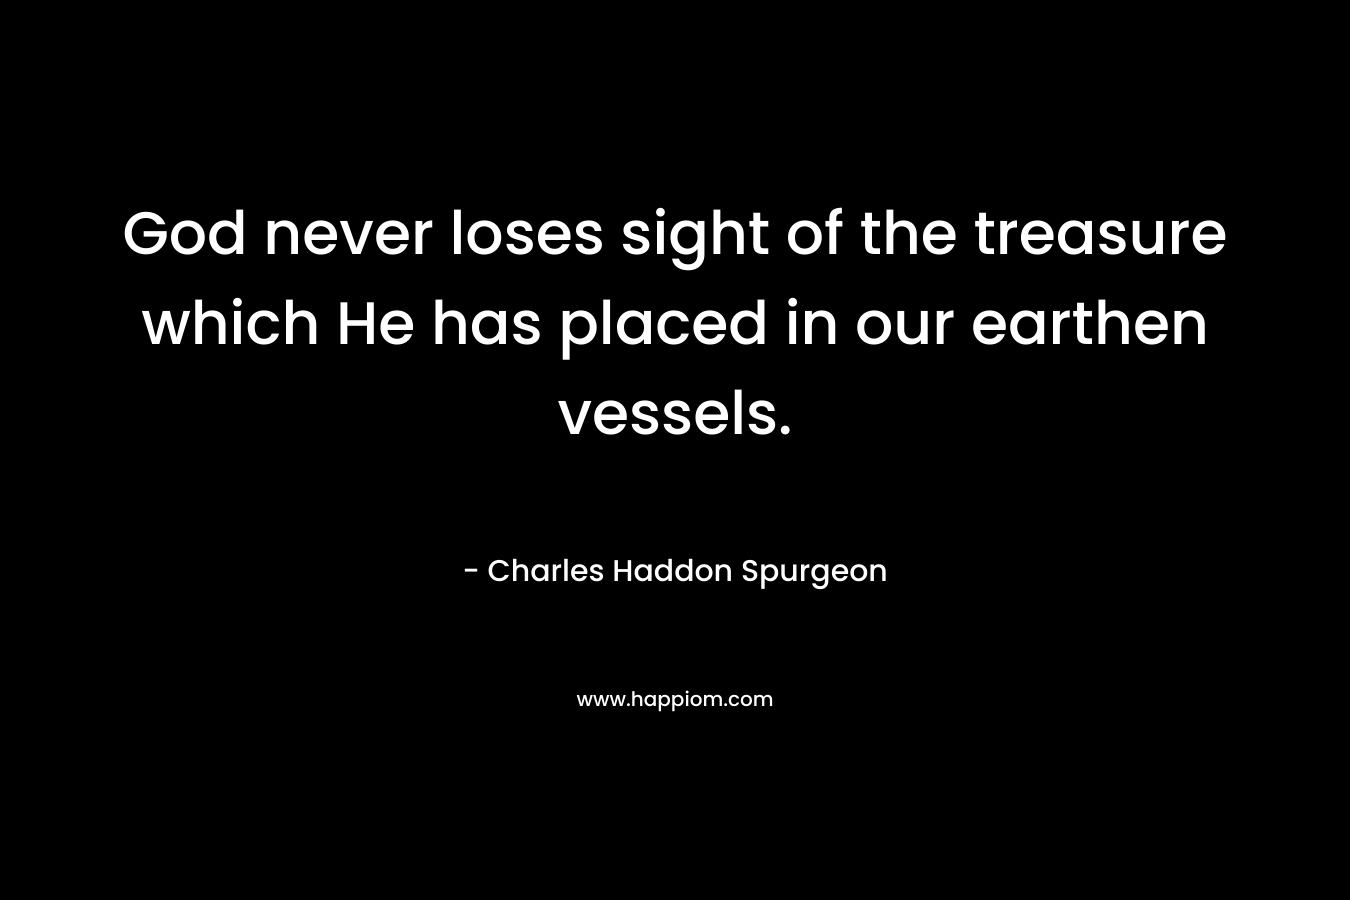 God never loses sight of the treasure which He has placed in our earthen vessels. – Charles Haddon Spurgeon